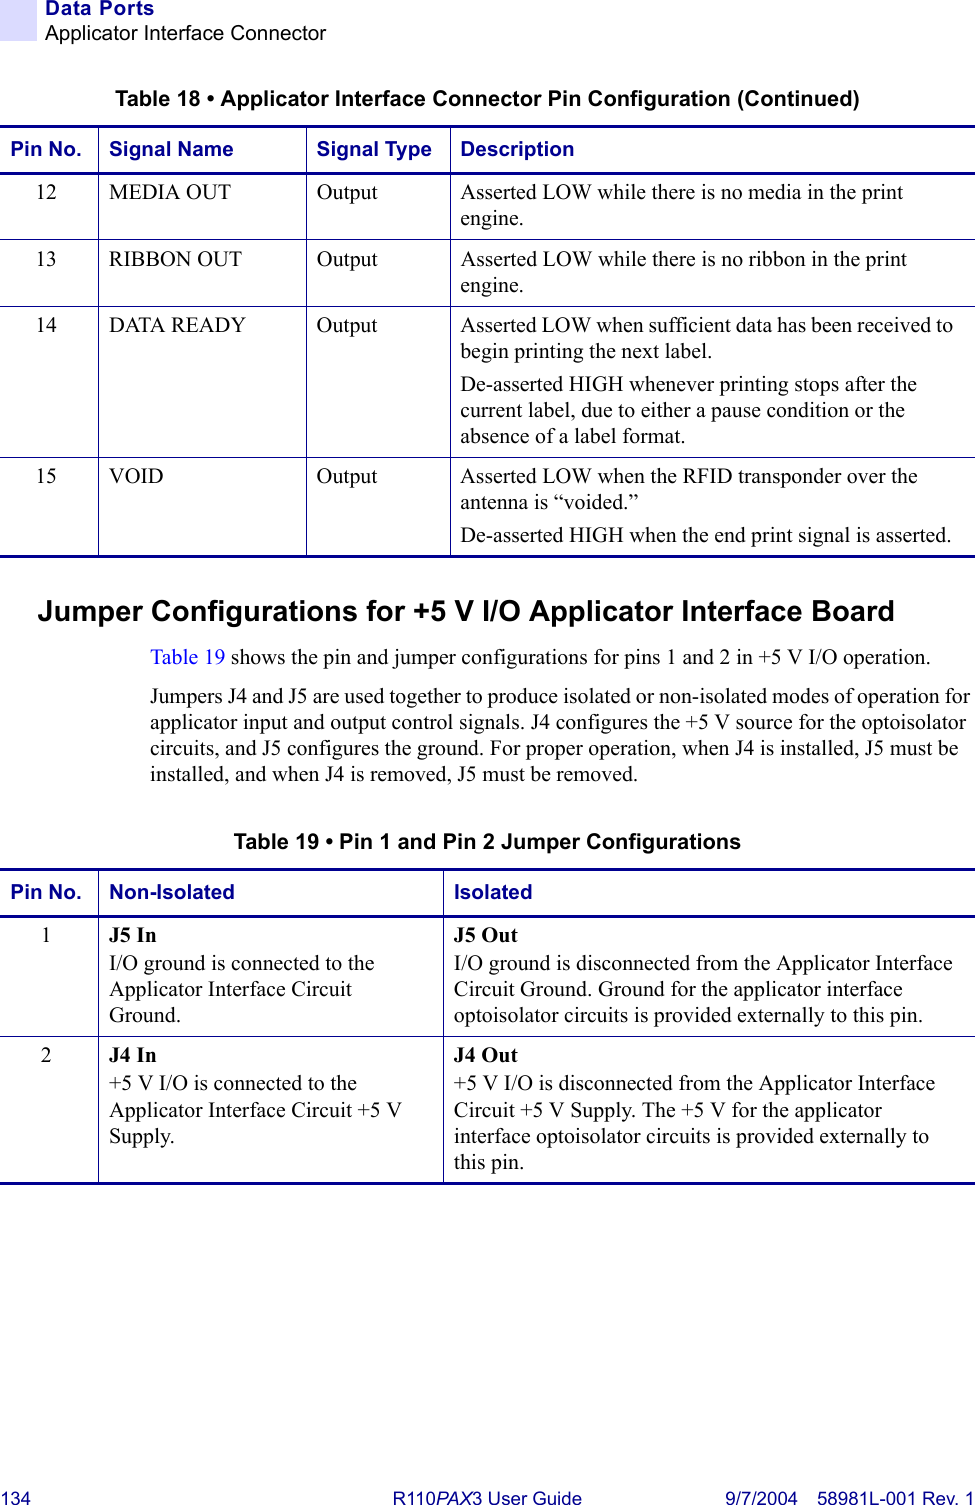 134 R110PA X3 User Guide 9/7/2004 58981L-001 Rev. 1Data PortsApplicator Interface ConnectorJumper Configurations for +5 V I/O Applicator Interface BoardTable 19 shows the pin and jumper configurations for pins 1 and 2 in +5 V I/O operation. Jumpers J4 and J5 are used together to produce isolated or non-isolated modes of operation for applicator input and output control signals. J4 configures the +5 V source for the optoisolator circuits, and J5 configures the ground. For proper operation, when J4 is installed, J5 must be installed, and when J4 is removed, J5 must be removed.12 MEDIA OUT Output Asserted LOW while there is no media in the print engine.13 RIBBON OUT Output Asserted LOW while there is no ribbon in the print engine.14 DATA READY Output Asserted LOW when sufficient data has been received to begin printing the next label.De-asserted HIGH whenever printing stops after the current label, due to either a pause condition or the absence of a label format.15 VOID Output Asserted LOW when the RFID transponder over the antenna is “voided.”De-asserted HIGH when the end print signal is asserted.Table 18 • Applicator Interface Connector Pin Configuration (Continued)Pin No. Signal Name Signal Type DescriptionTable 19 • Pin 1 and Pin 2 Jumper ConfigurationsPin No. Non-Isolated Isolated1J5 InI/O ground is connected to the Applicator Interface Circuit Ground.J5 OutI/O ground is disconnected from the Applicator Interface Circuit Ground. Ground for the applicator interface optoisolator circuits is provided externally to this pin.2J4 In+5 V I/O is connected to the Applicator Interface Circuit +5 V Supply.J4 Out+5 V I/O is disconnected from the Applicator Interface Circuit +5 V Supply. The +5 V for the applicator interface optoisolator circuits is provided externally to this pin.